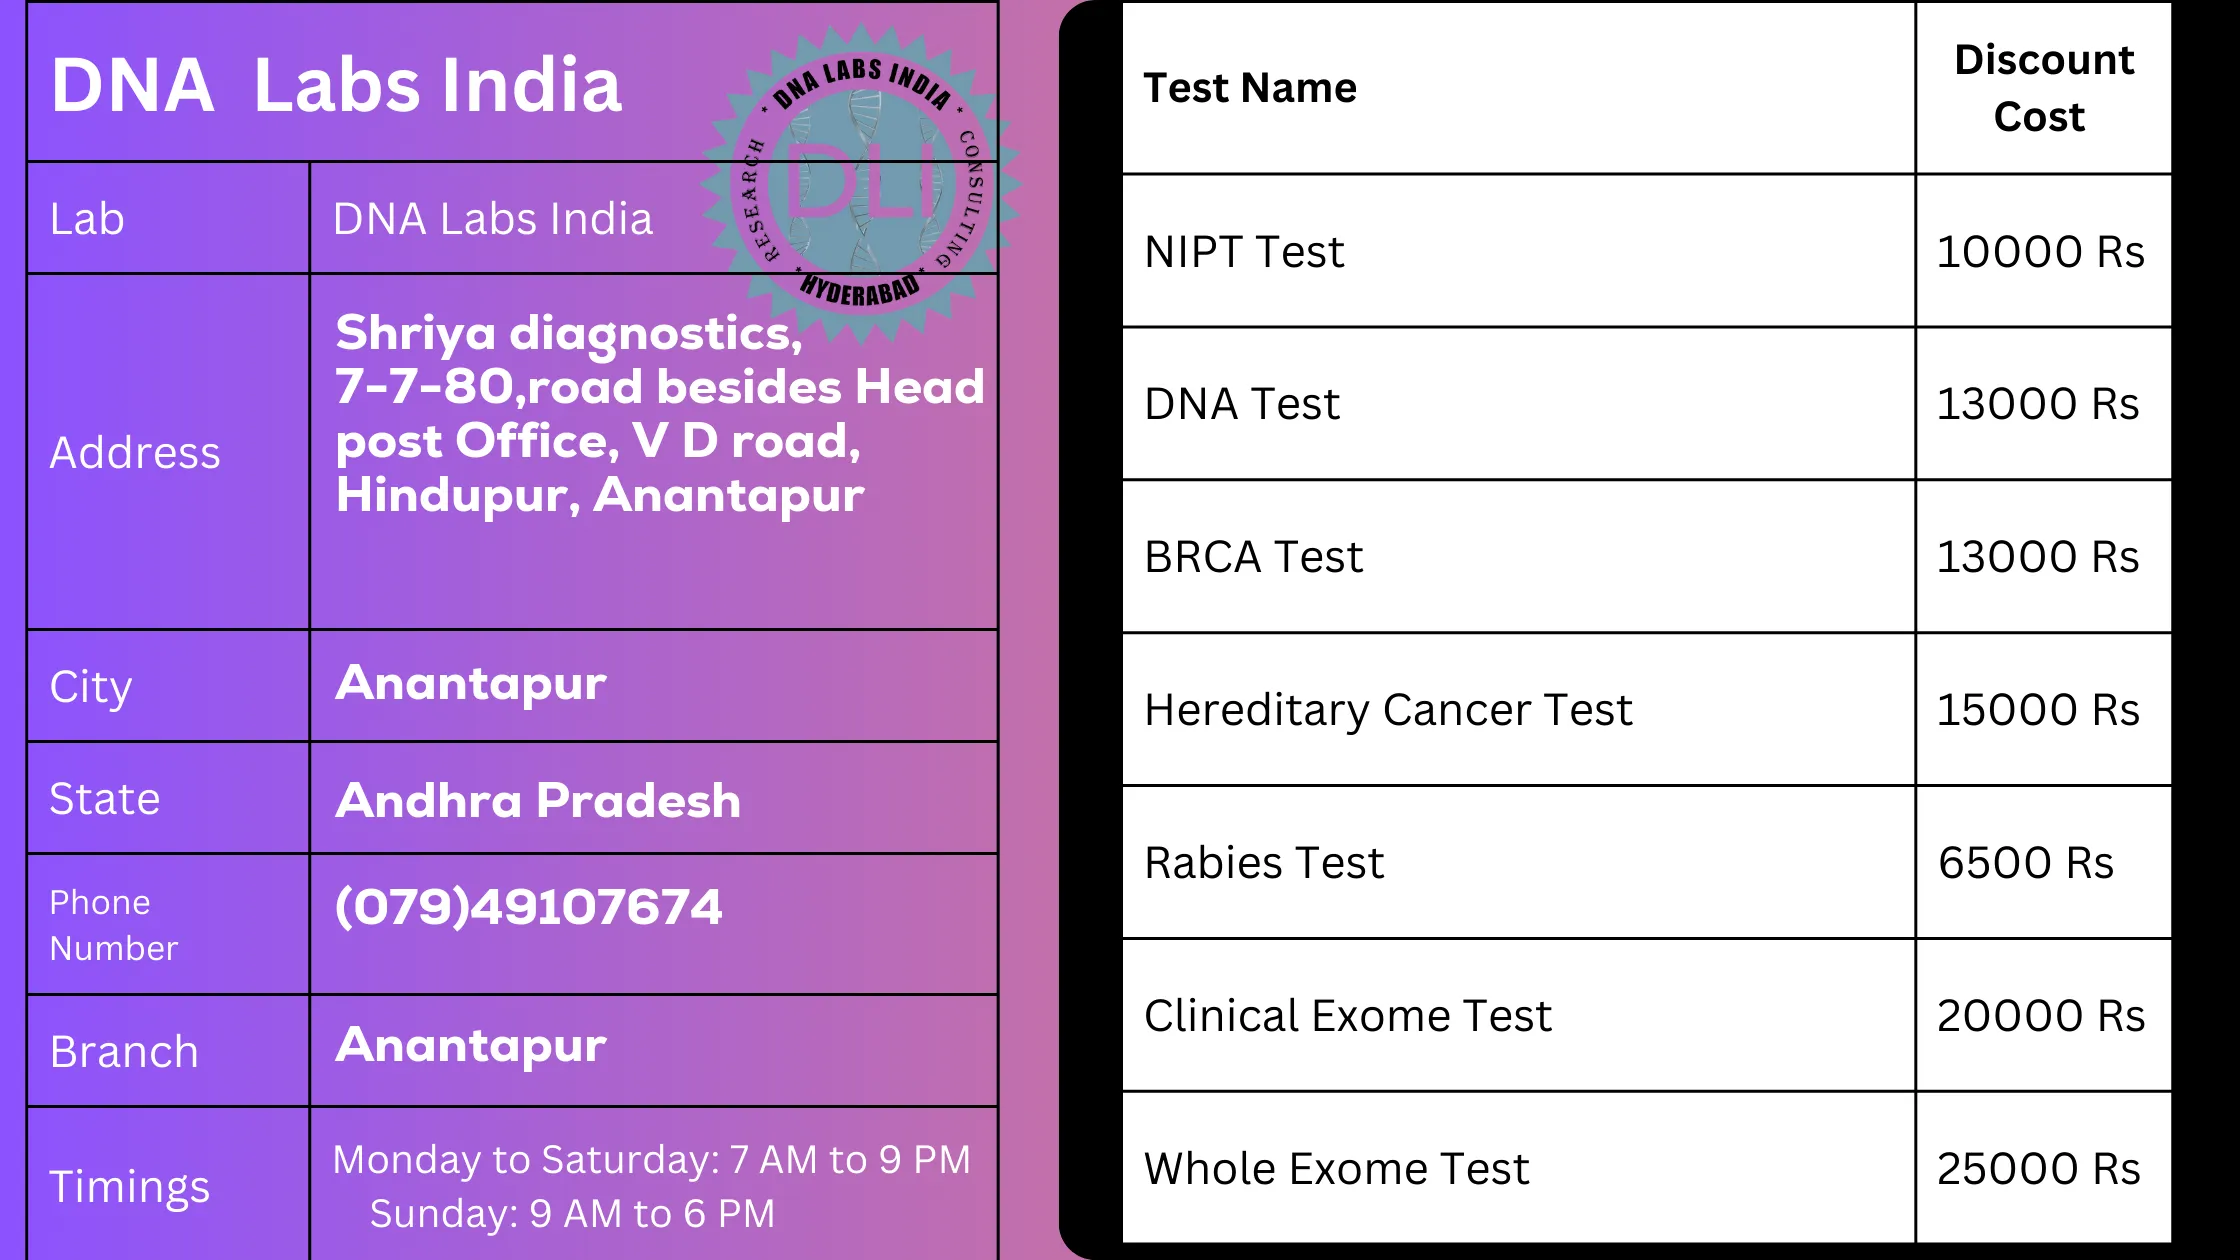 DNA Labs India in Anantapur: Your Trusted Partner for Genetic Testing